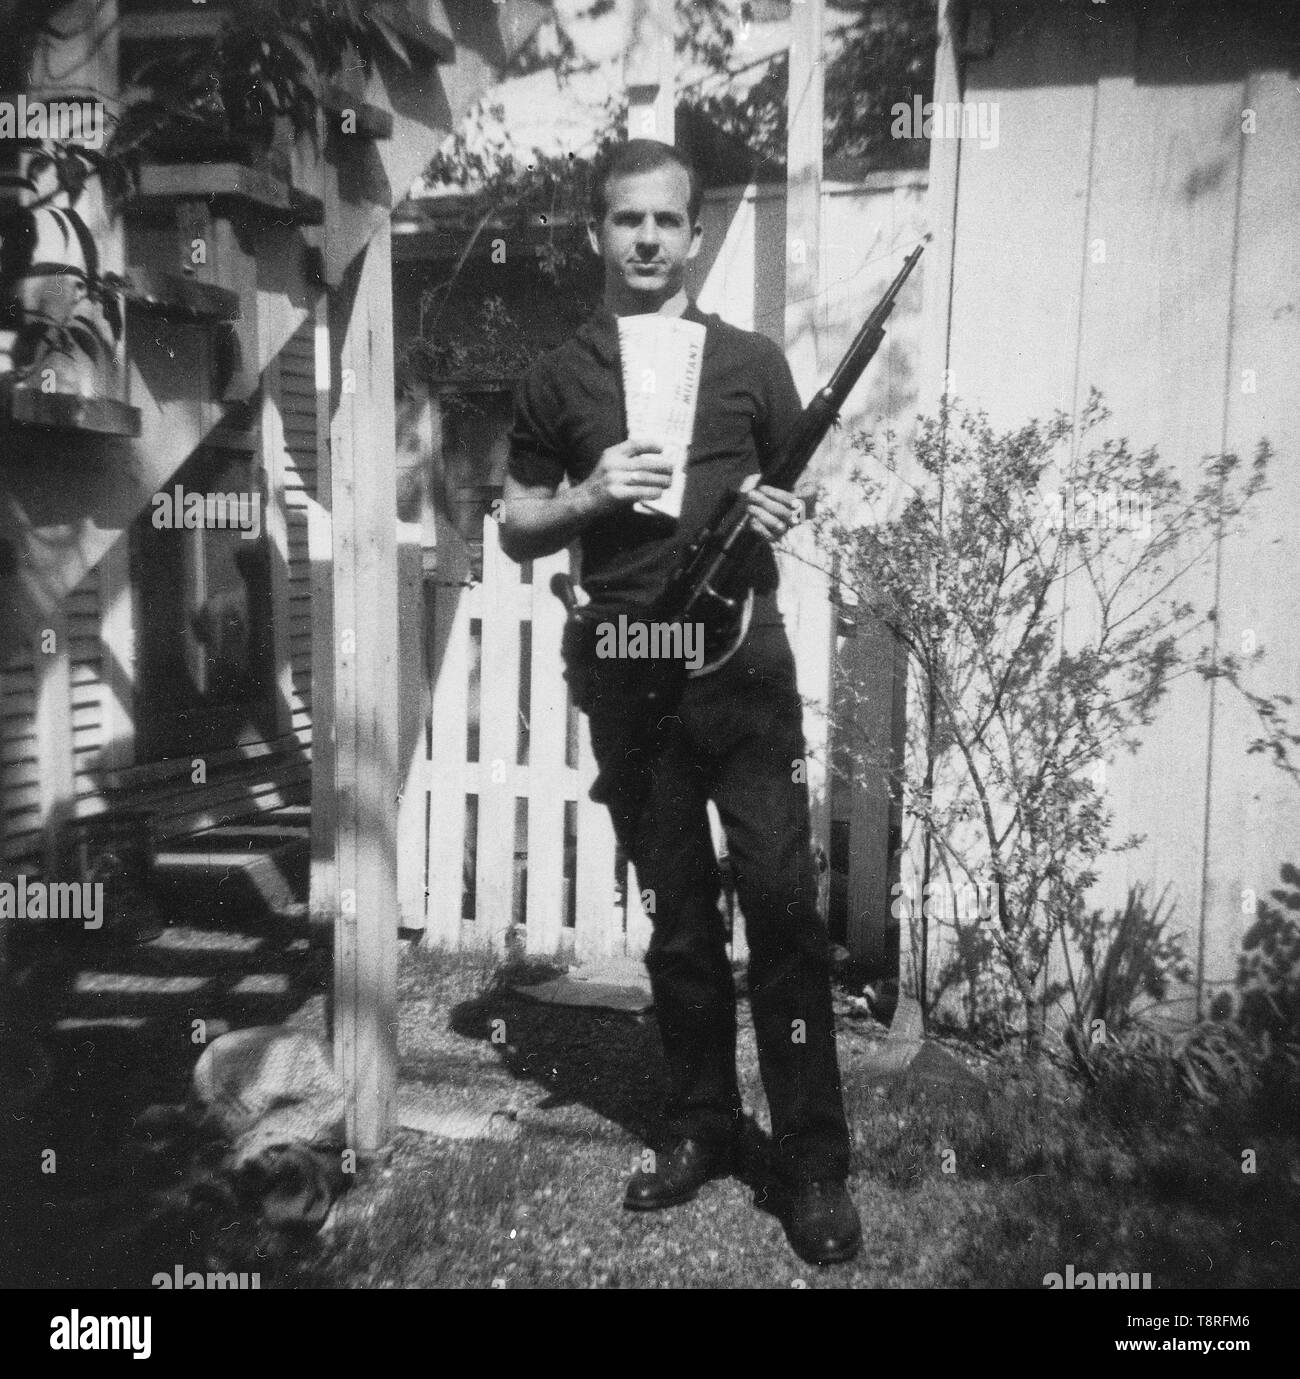 Photo of Lee Harvey Oswald with rifle, taken in Oswald's back yard, Neely Street, Dallas Texas, March 1963. The photo was Warren Commission exhibit 133-A. Stock Photo